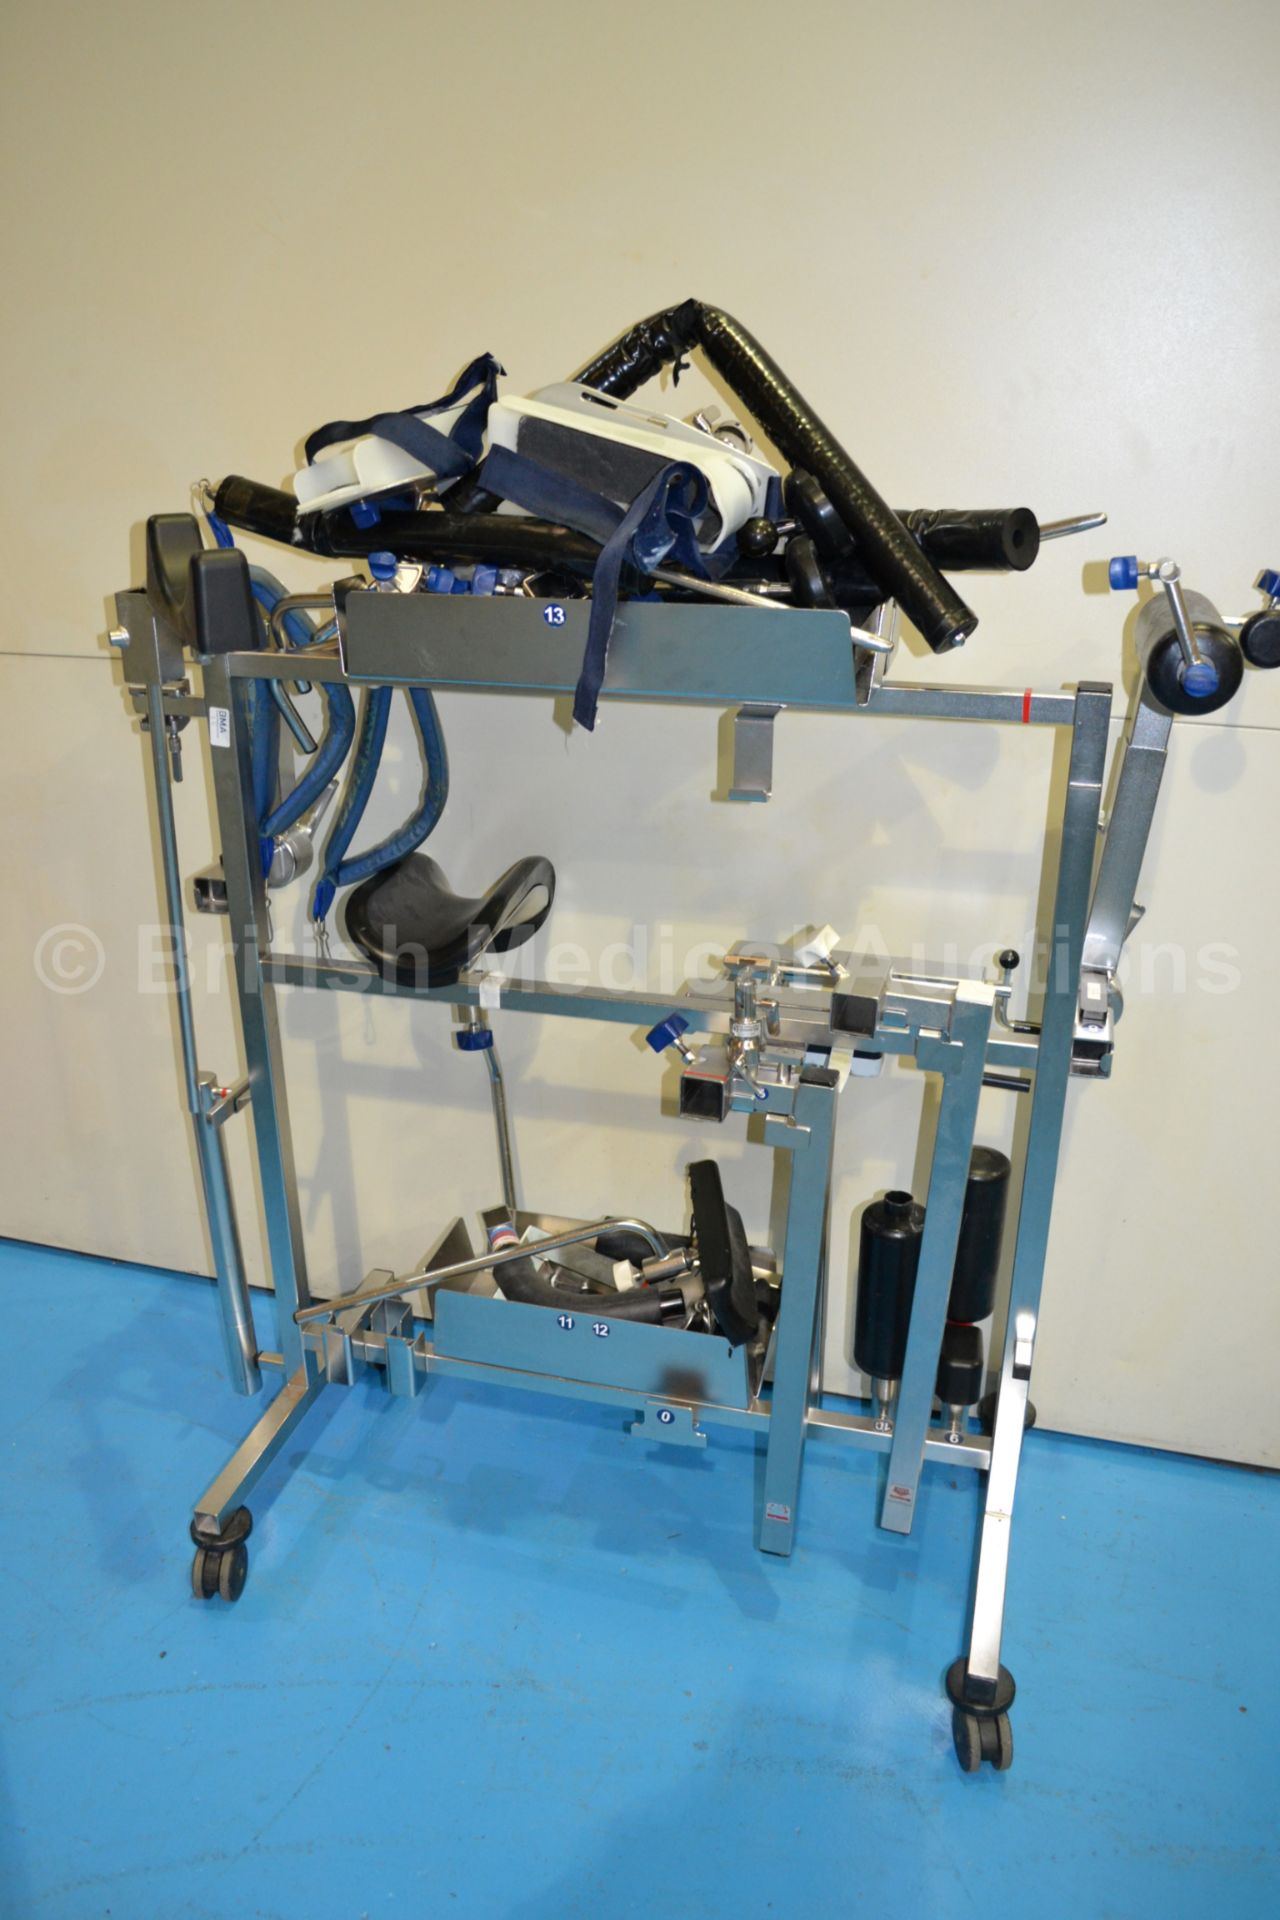 Operating Table Accessories Trolley with Accessori - Image 2 of 2